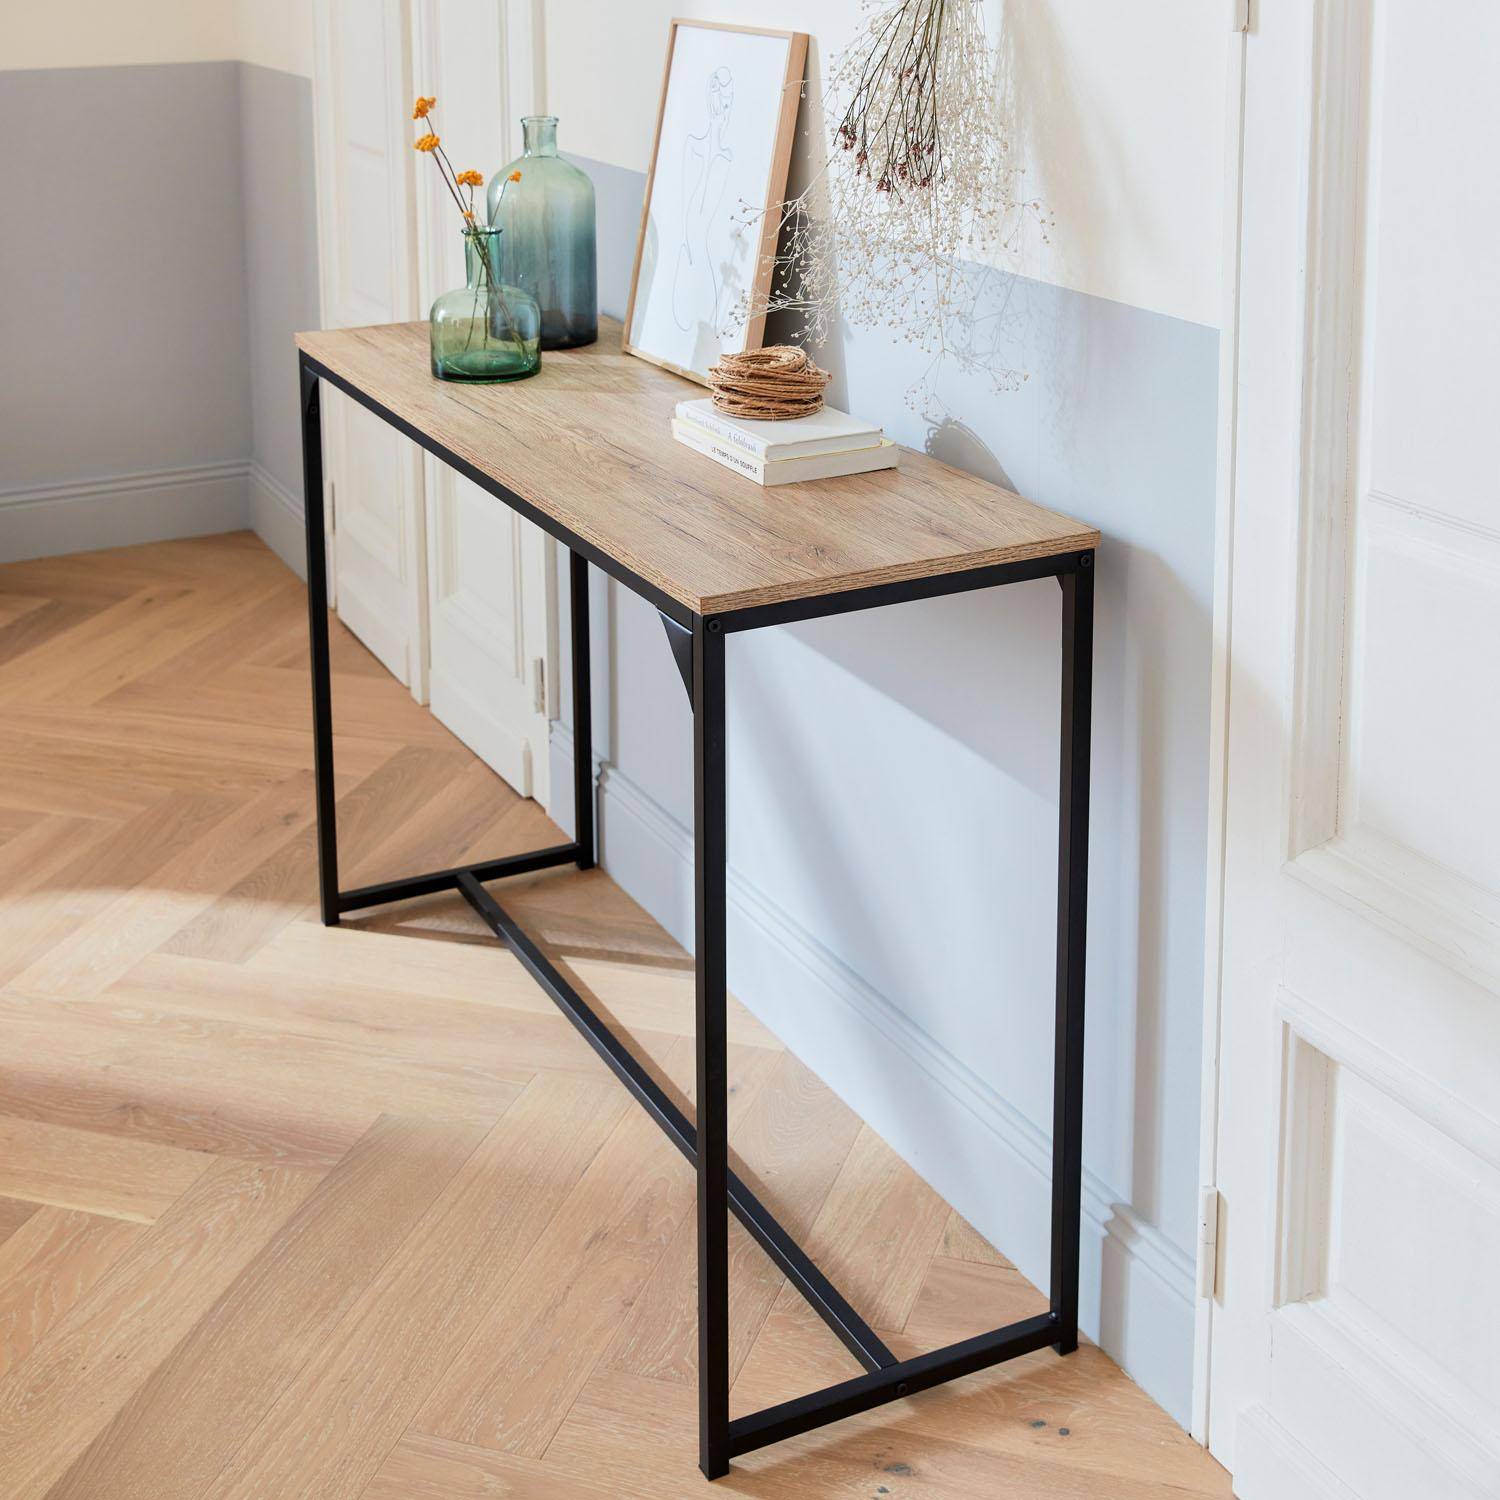 Metal and wood-style hallway console table with industrial metal legs 120cm - Loft - Black,sweeek,Photo1